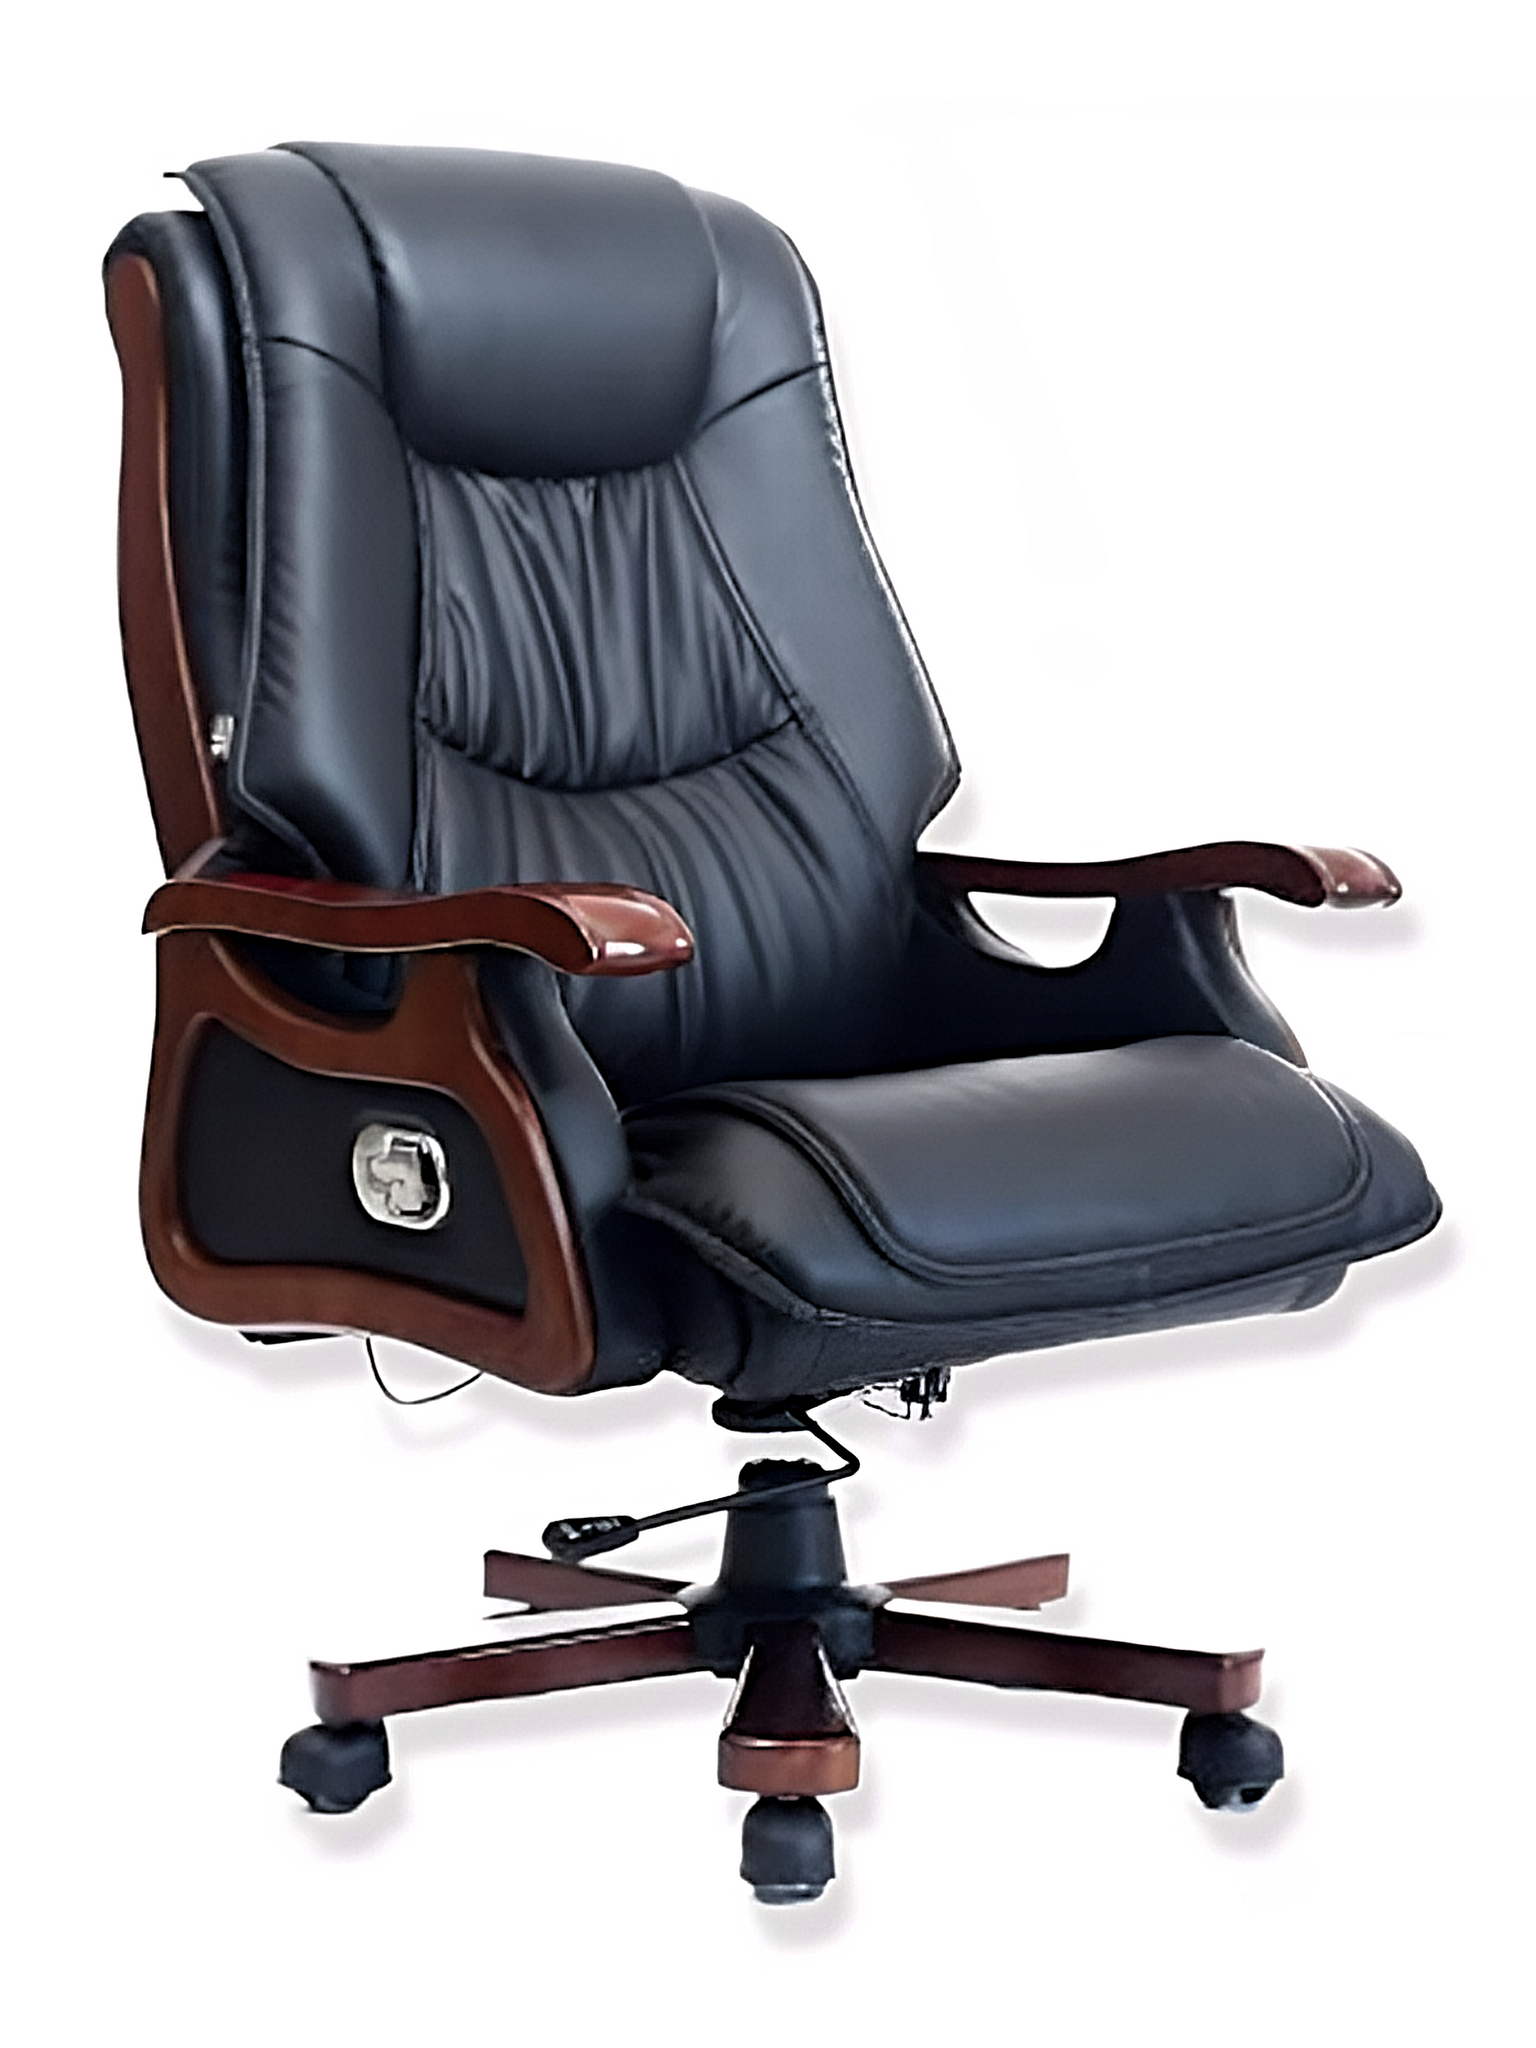 Best leather ceo chair - online executive chair - multiwood